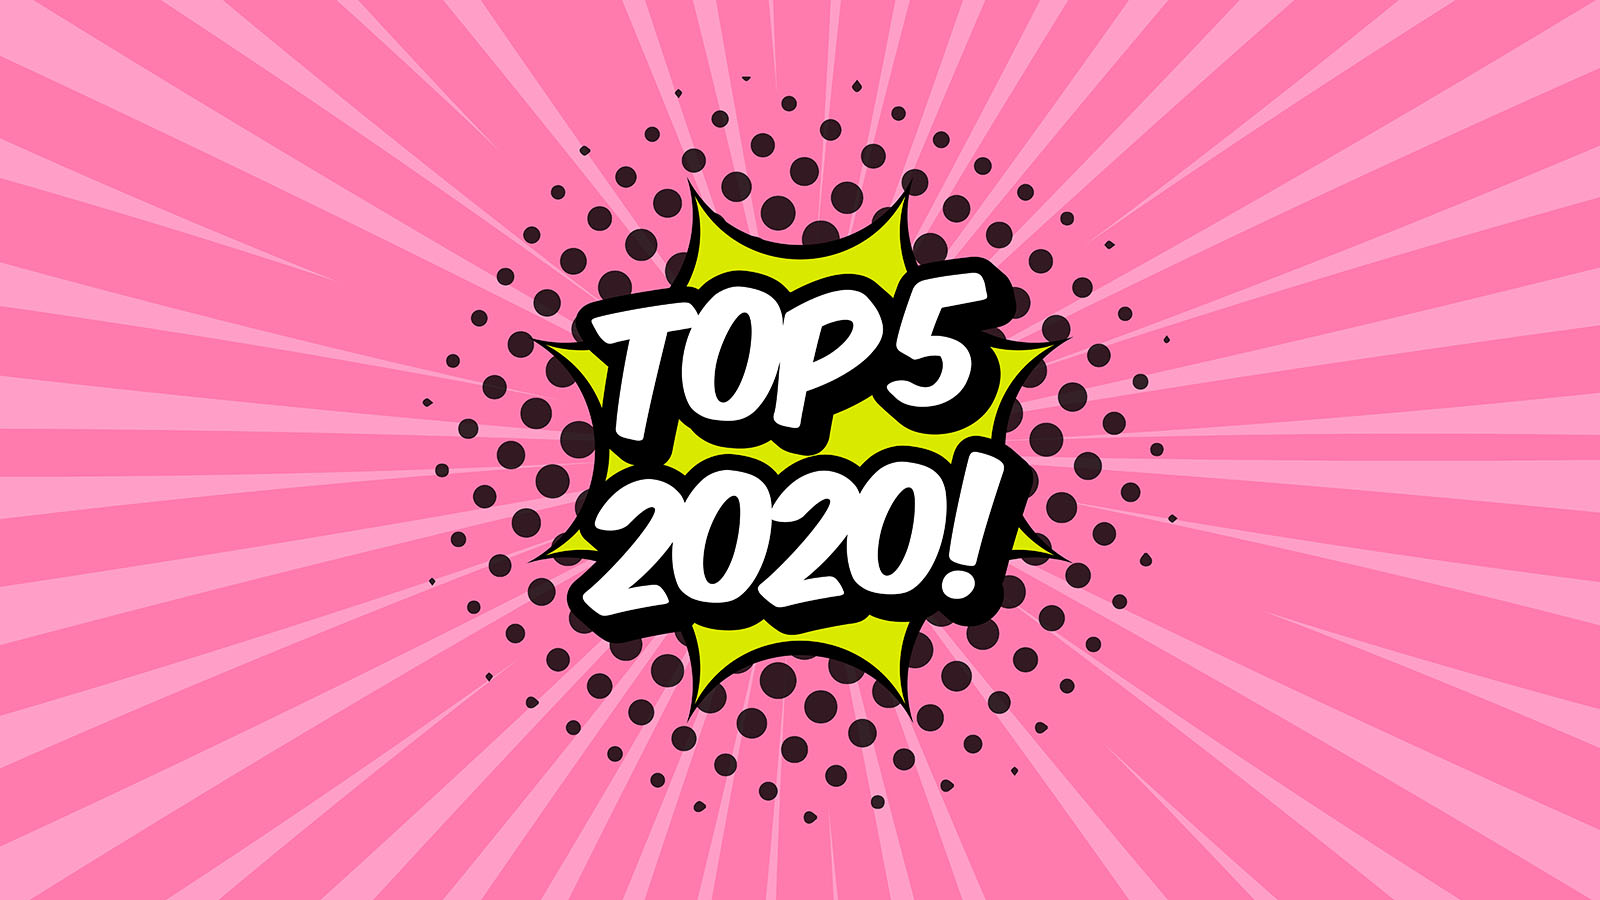 Thumbnail for Top 5 Videos of 2020